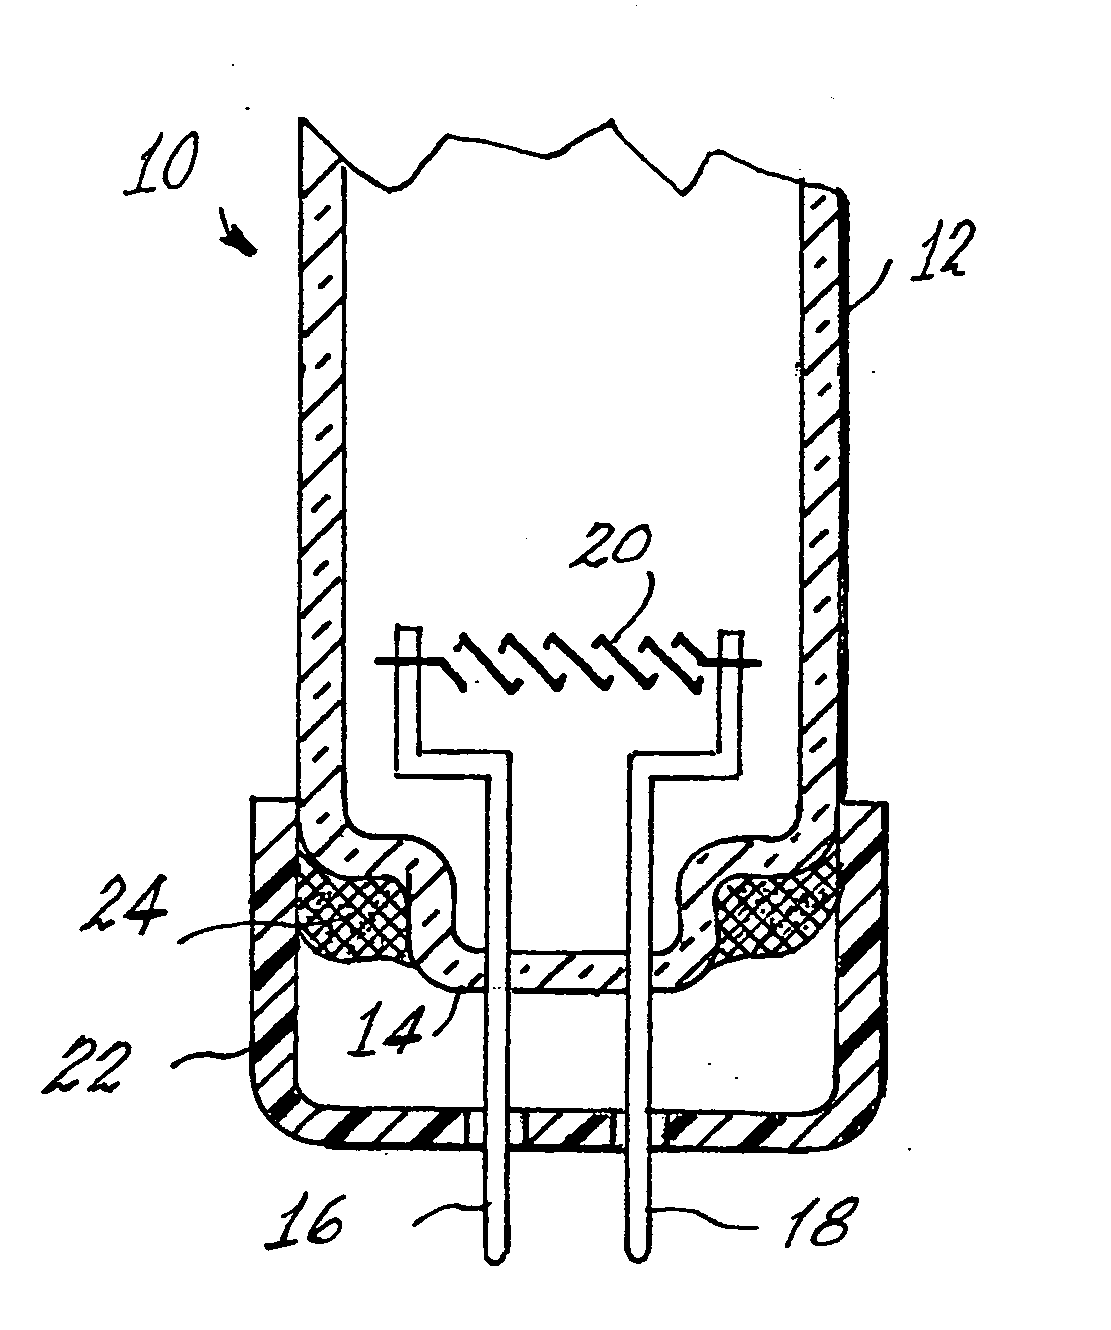 Method of controlling leachable mercury in lamps